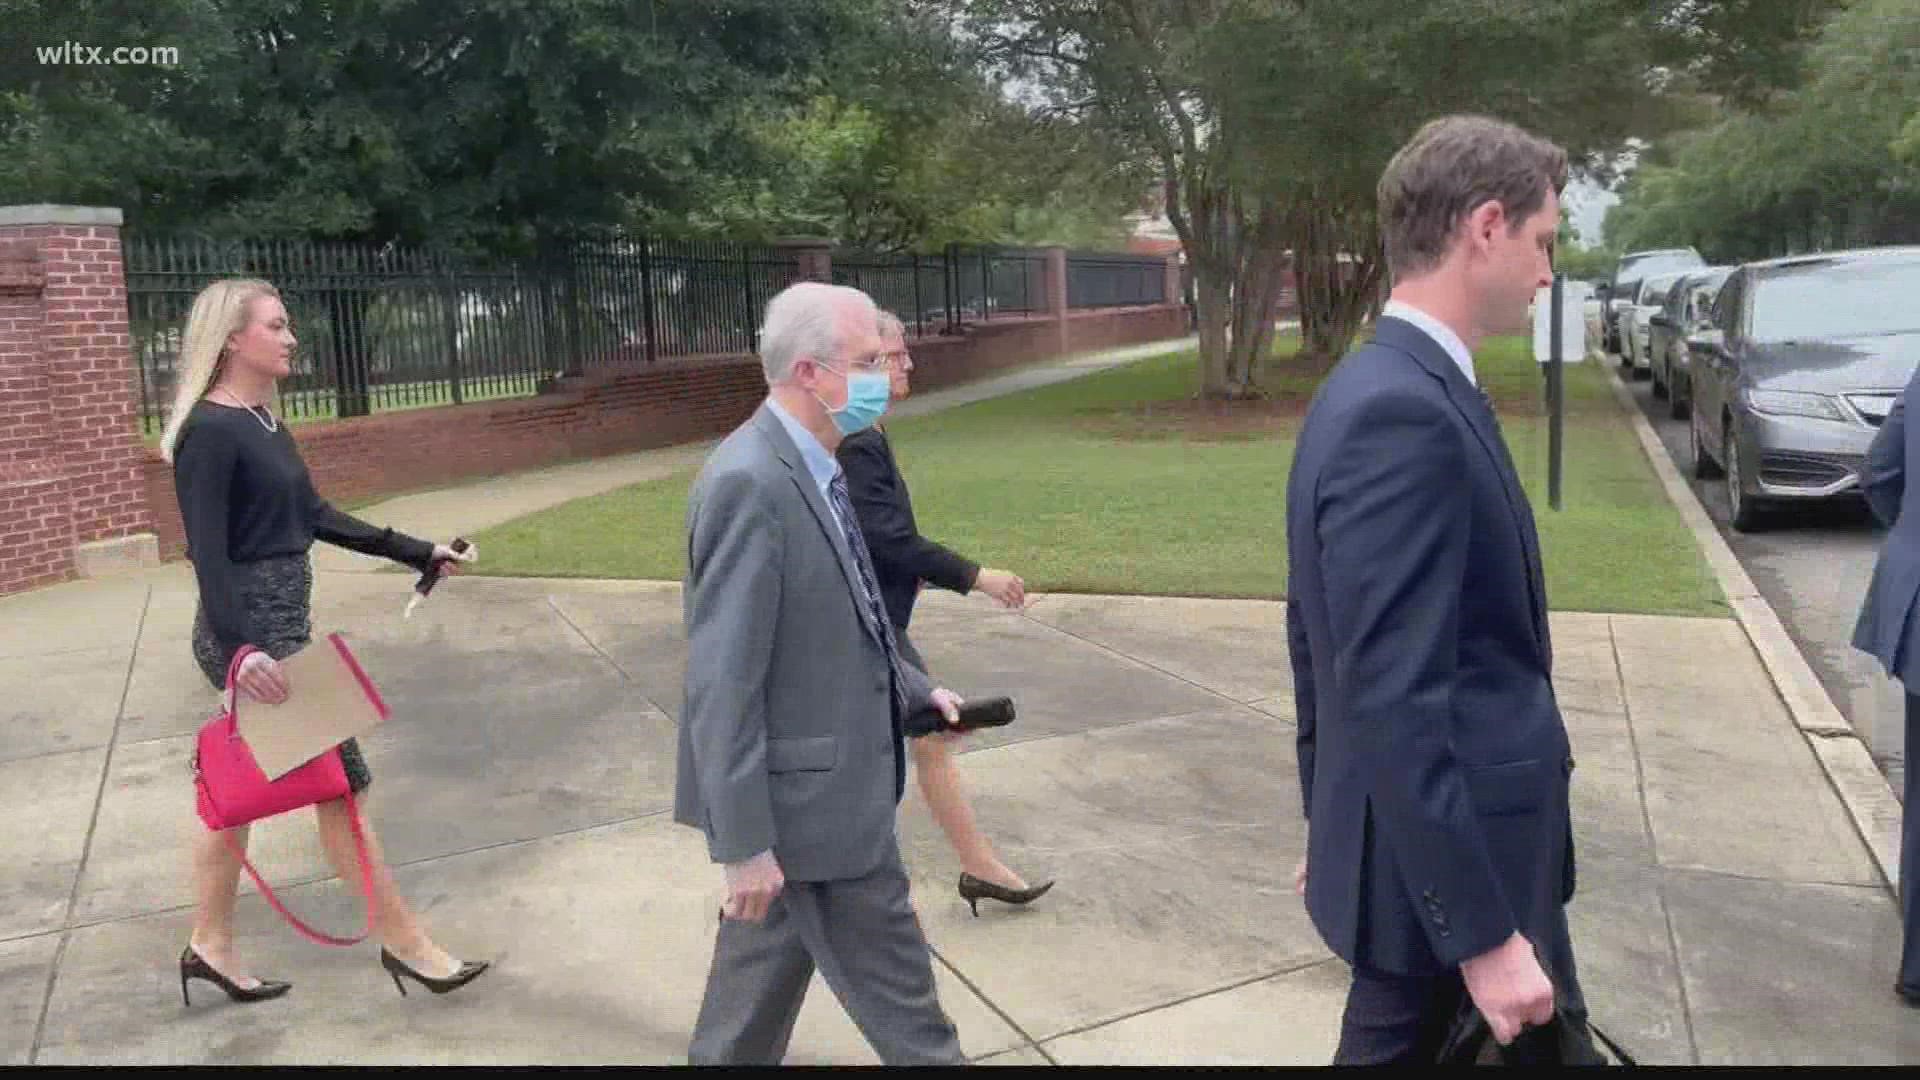 US District Judge Mary Lewis handed down the sentence on Thursday in Columbia to Kevin Marsh over the failed VC Summer Nuclear reactors project.